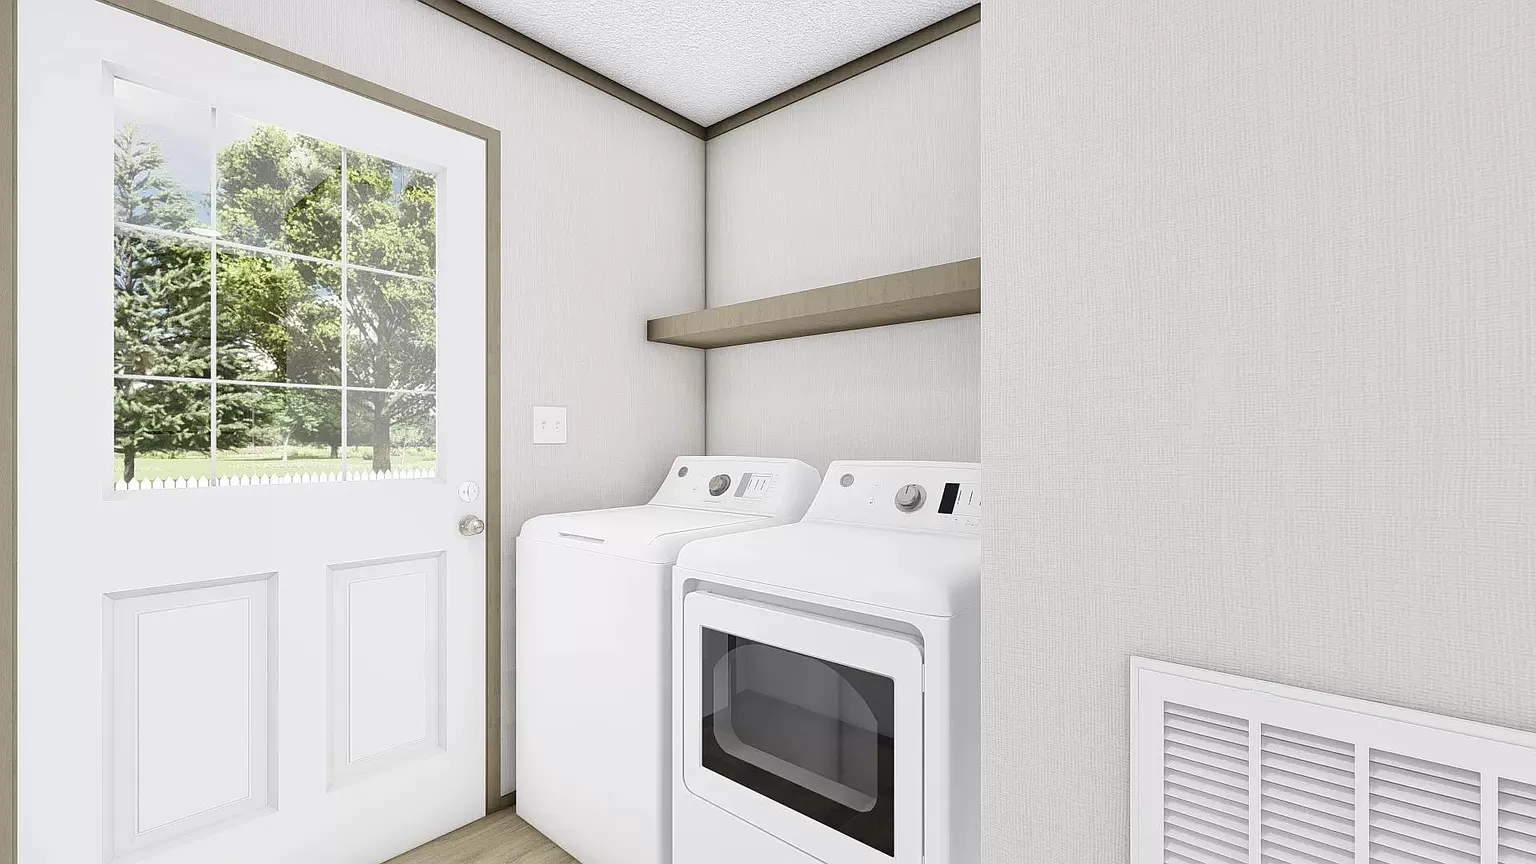 White washer and dryer in laundry room.